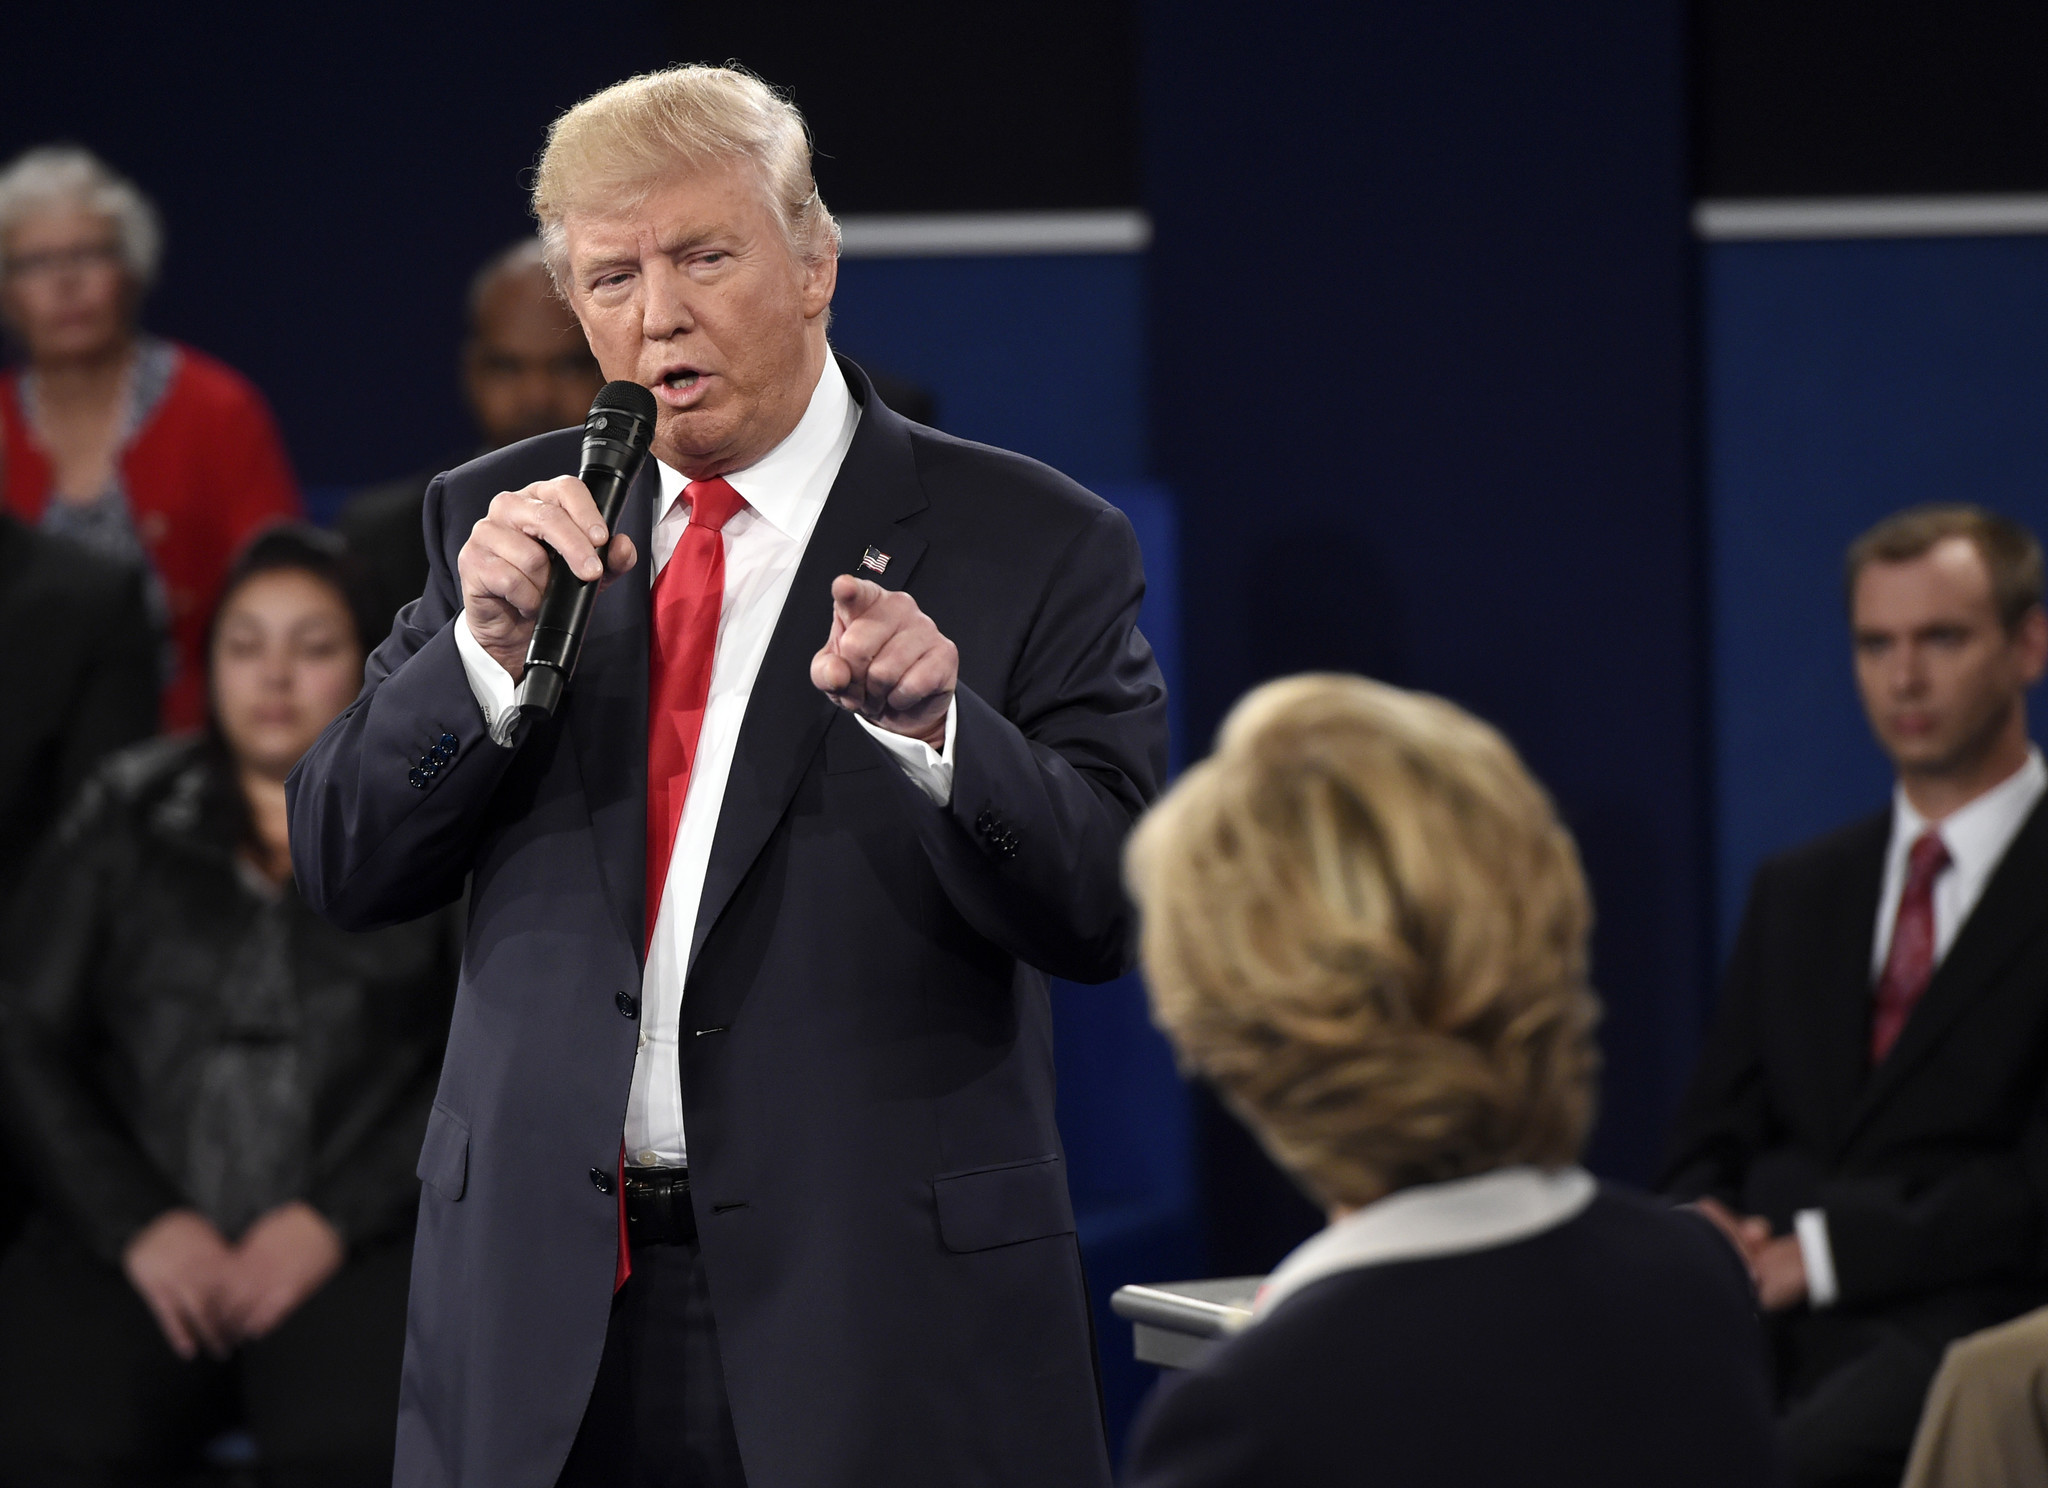 Are we at the bottom yet? Trump threatens Clinton with jail time - Chicago Tribune2048 x 1488